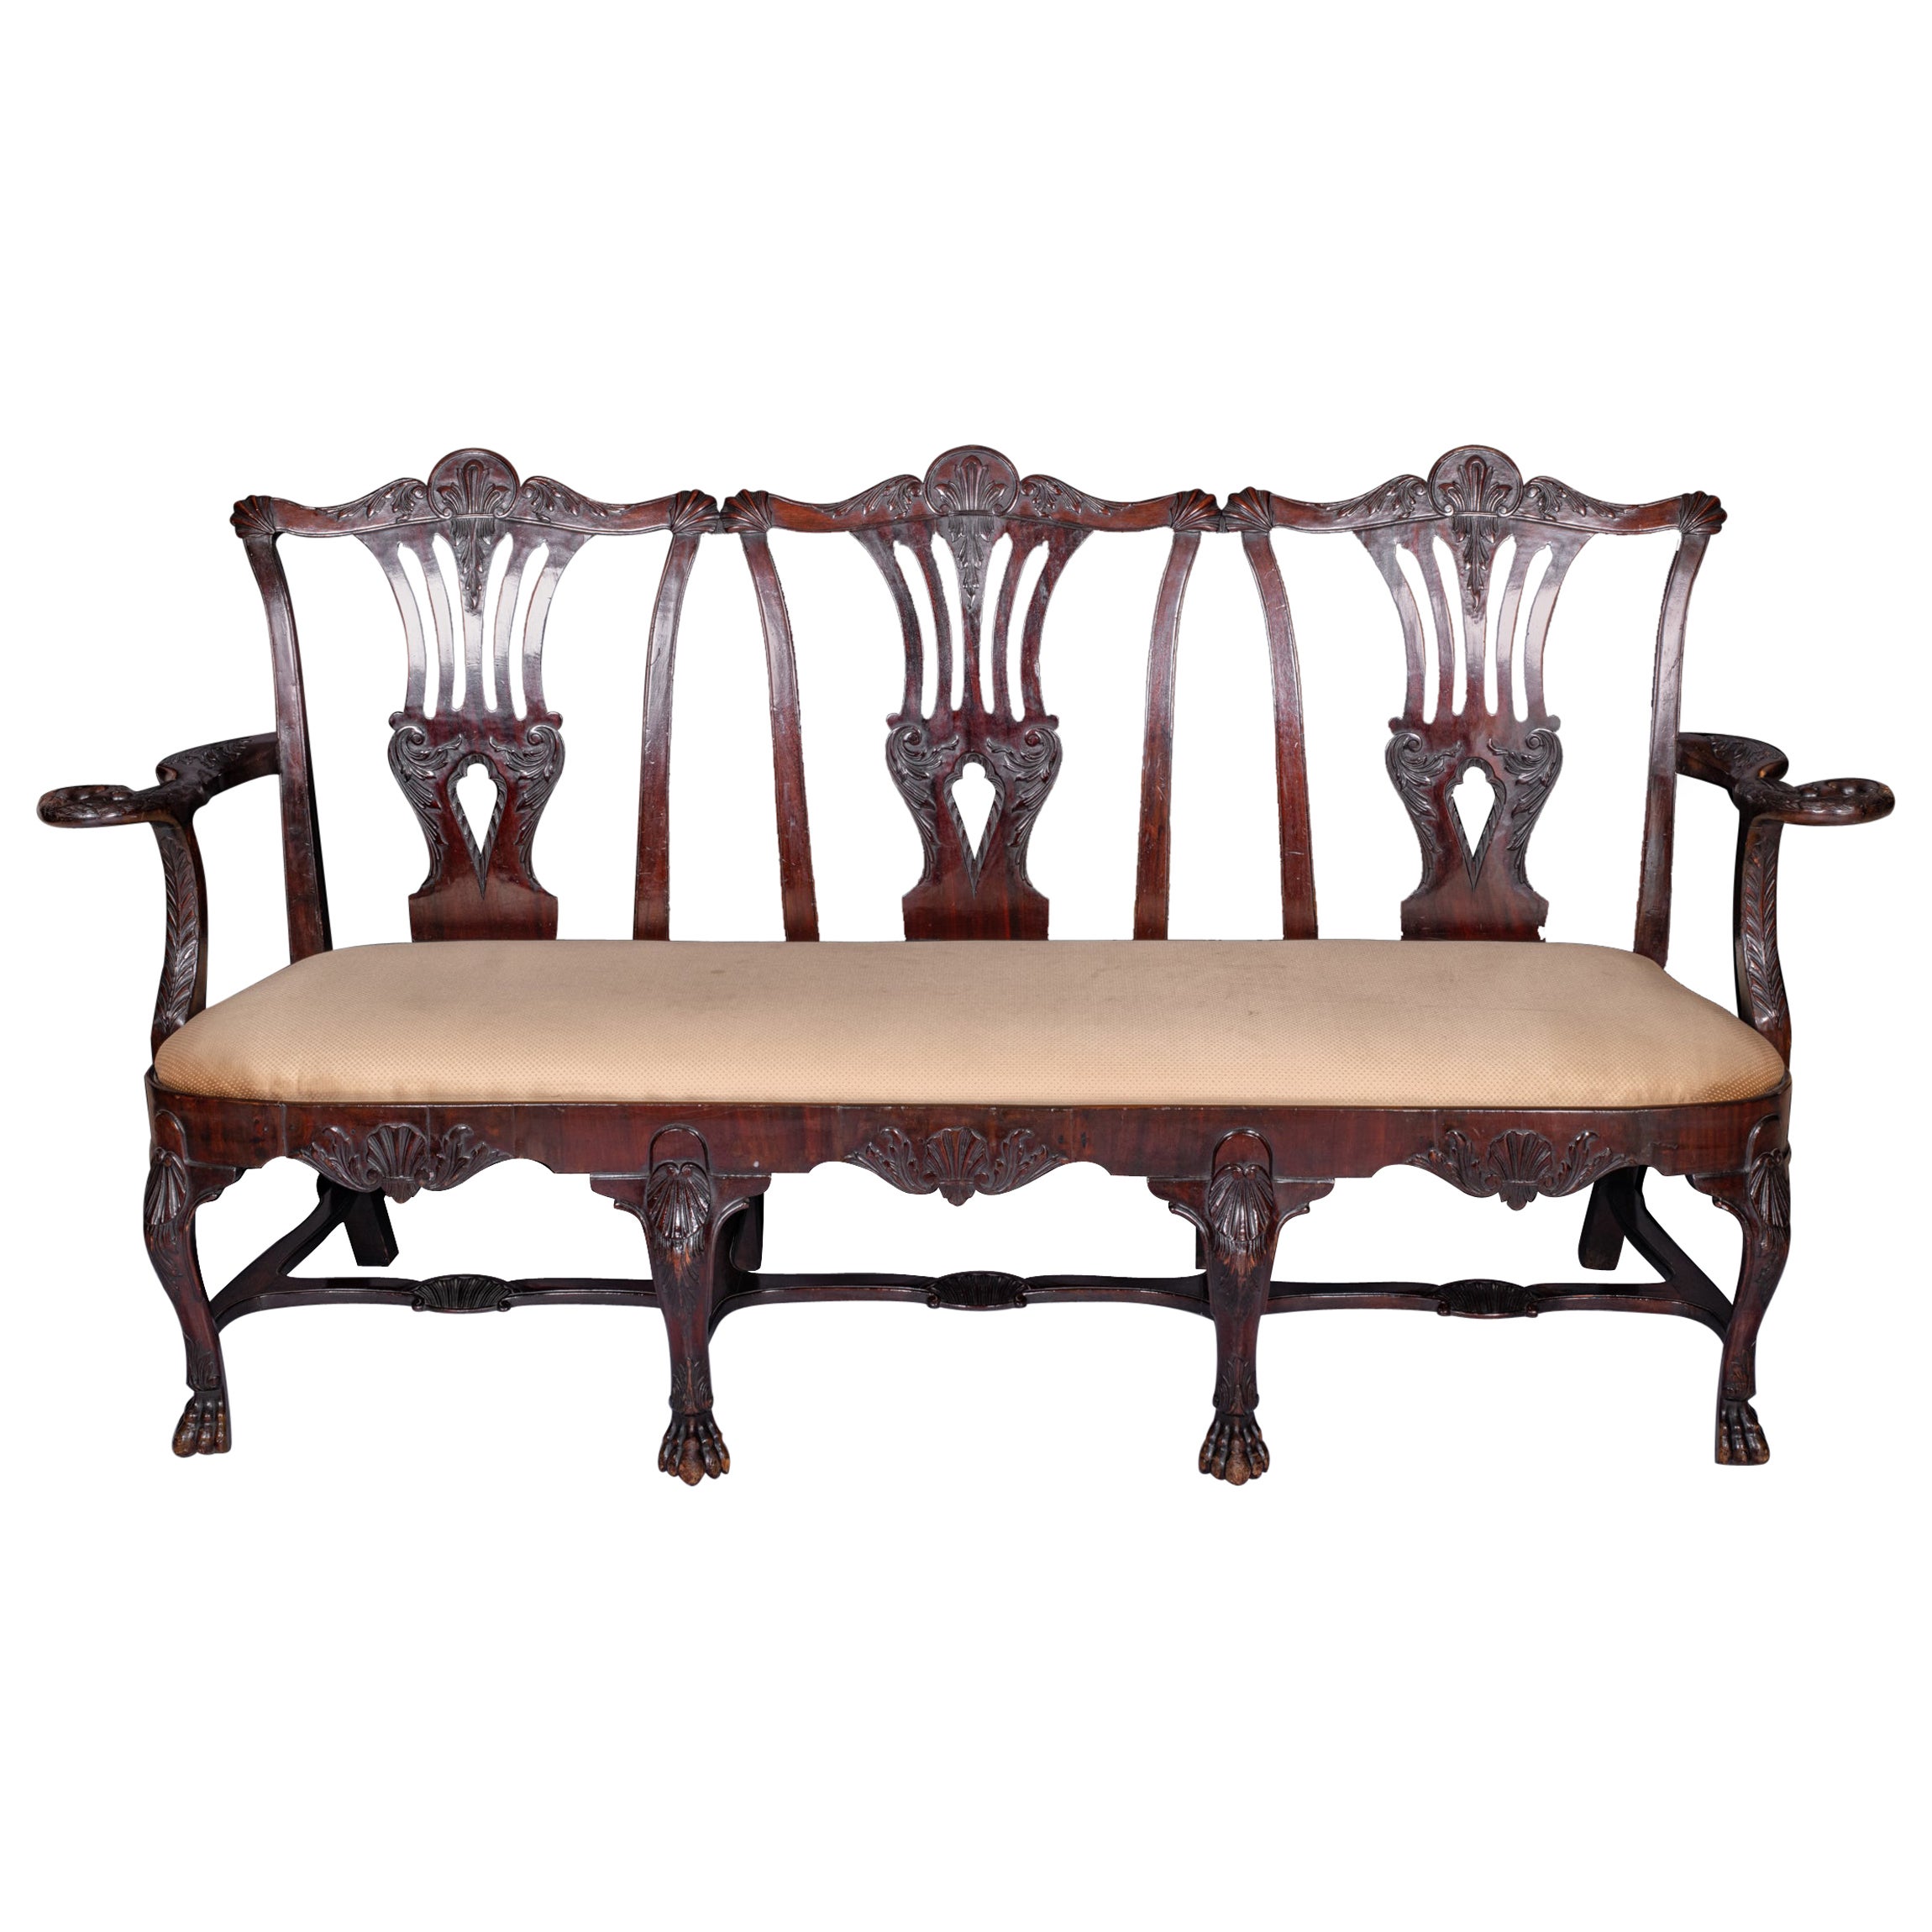 19th Century Irish George III Style Triple Chair Back Settee by Butler of Dublin For Sale